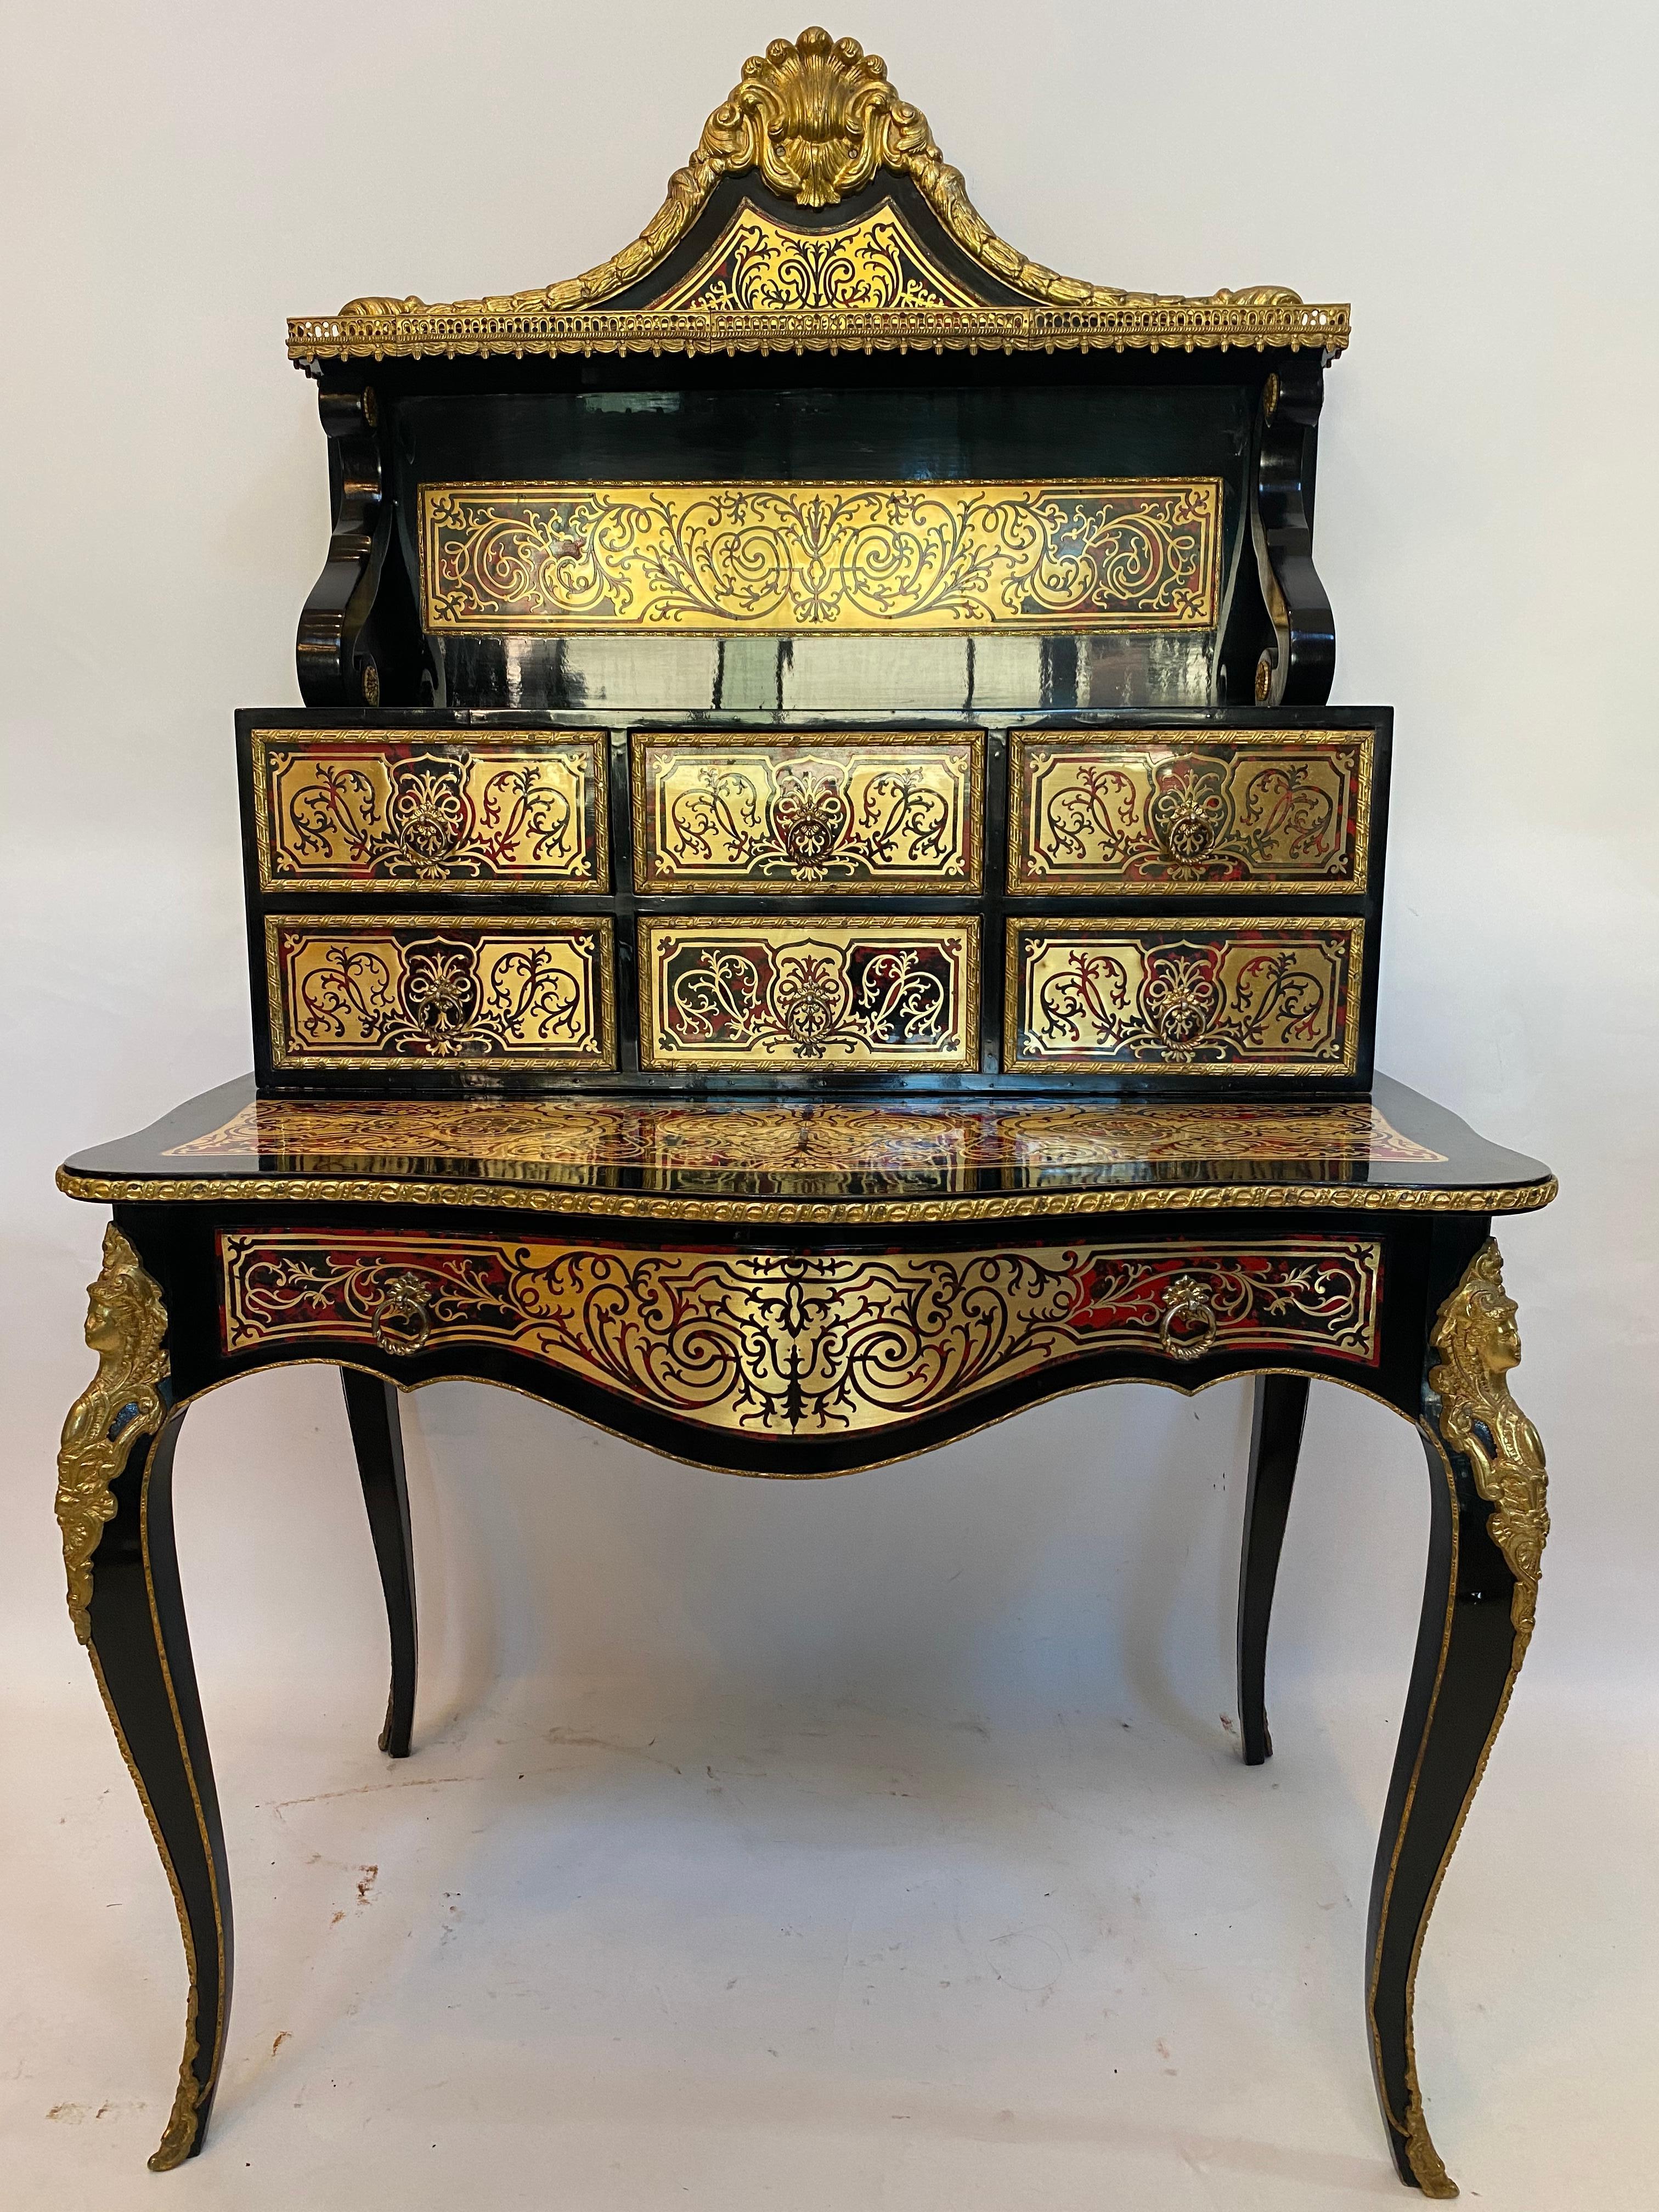 This Louis XV style vanity gilt bronze-mounted desk has one wide drawer in front and there are 6 drawers on two lines for even more storage. Fine writing desk with curved sides and gracefully carved legs bronze mounts. See more pictures, measures: